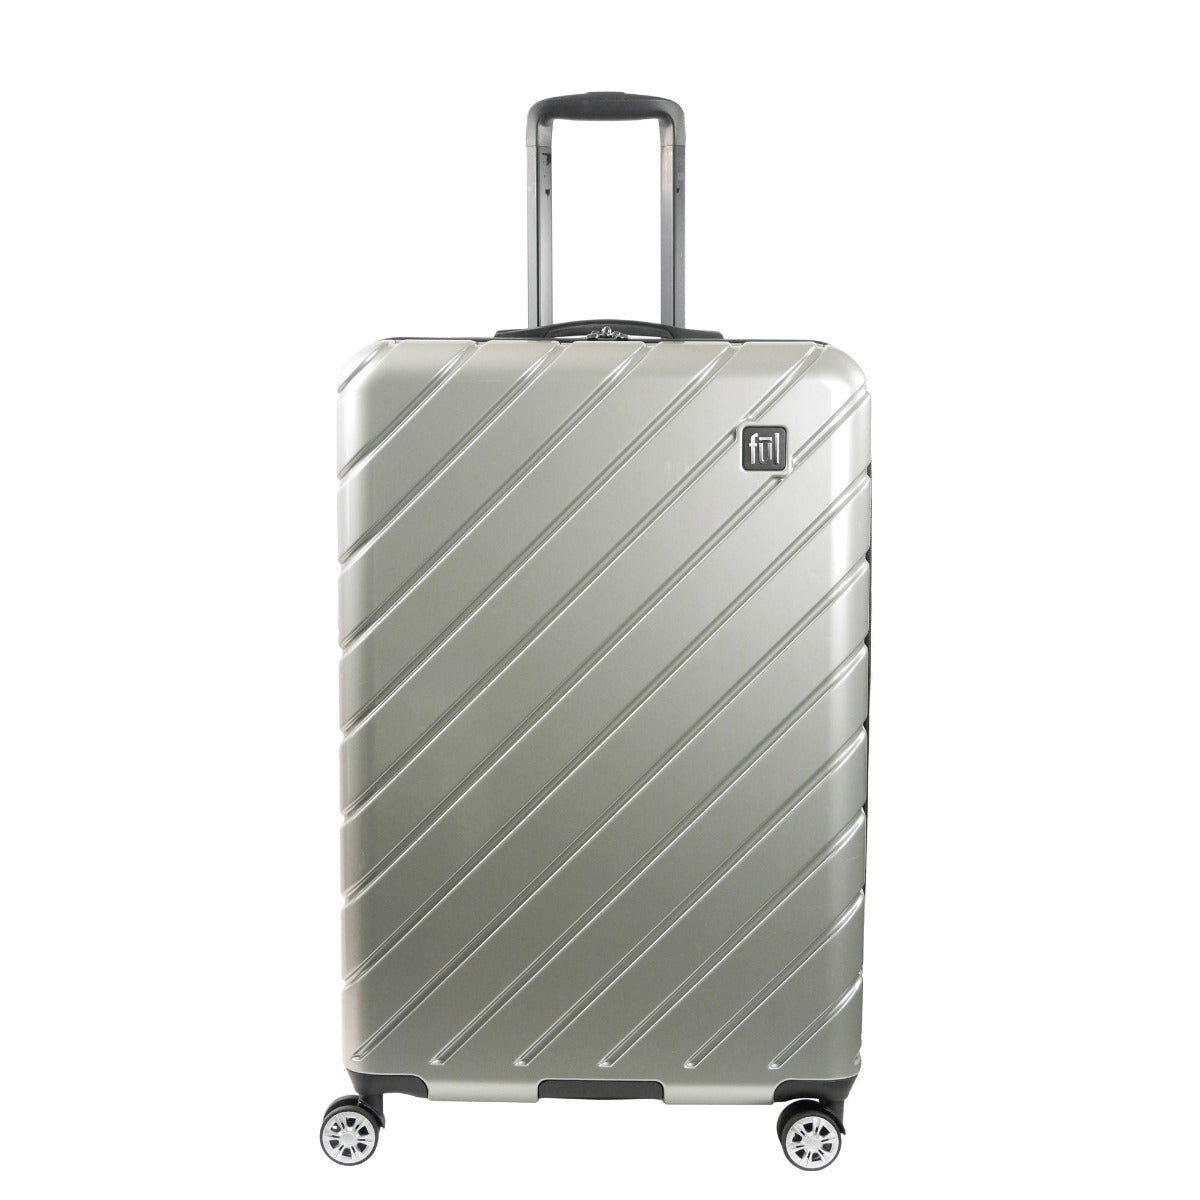 Velocity 31 inch Hardside Spinner Checked Luggage Suitcase Silver